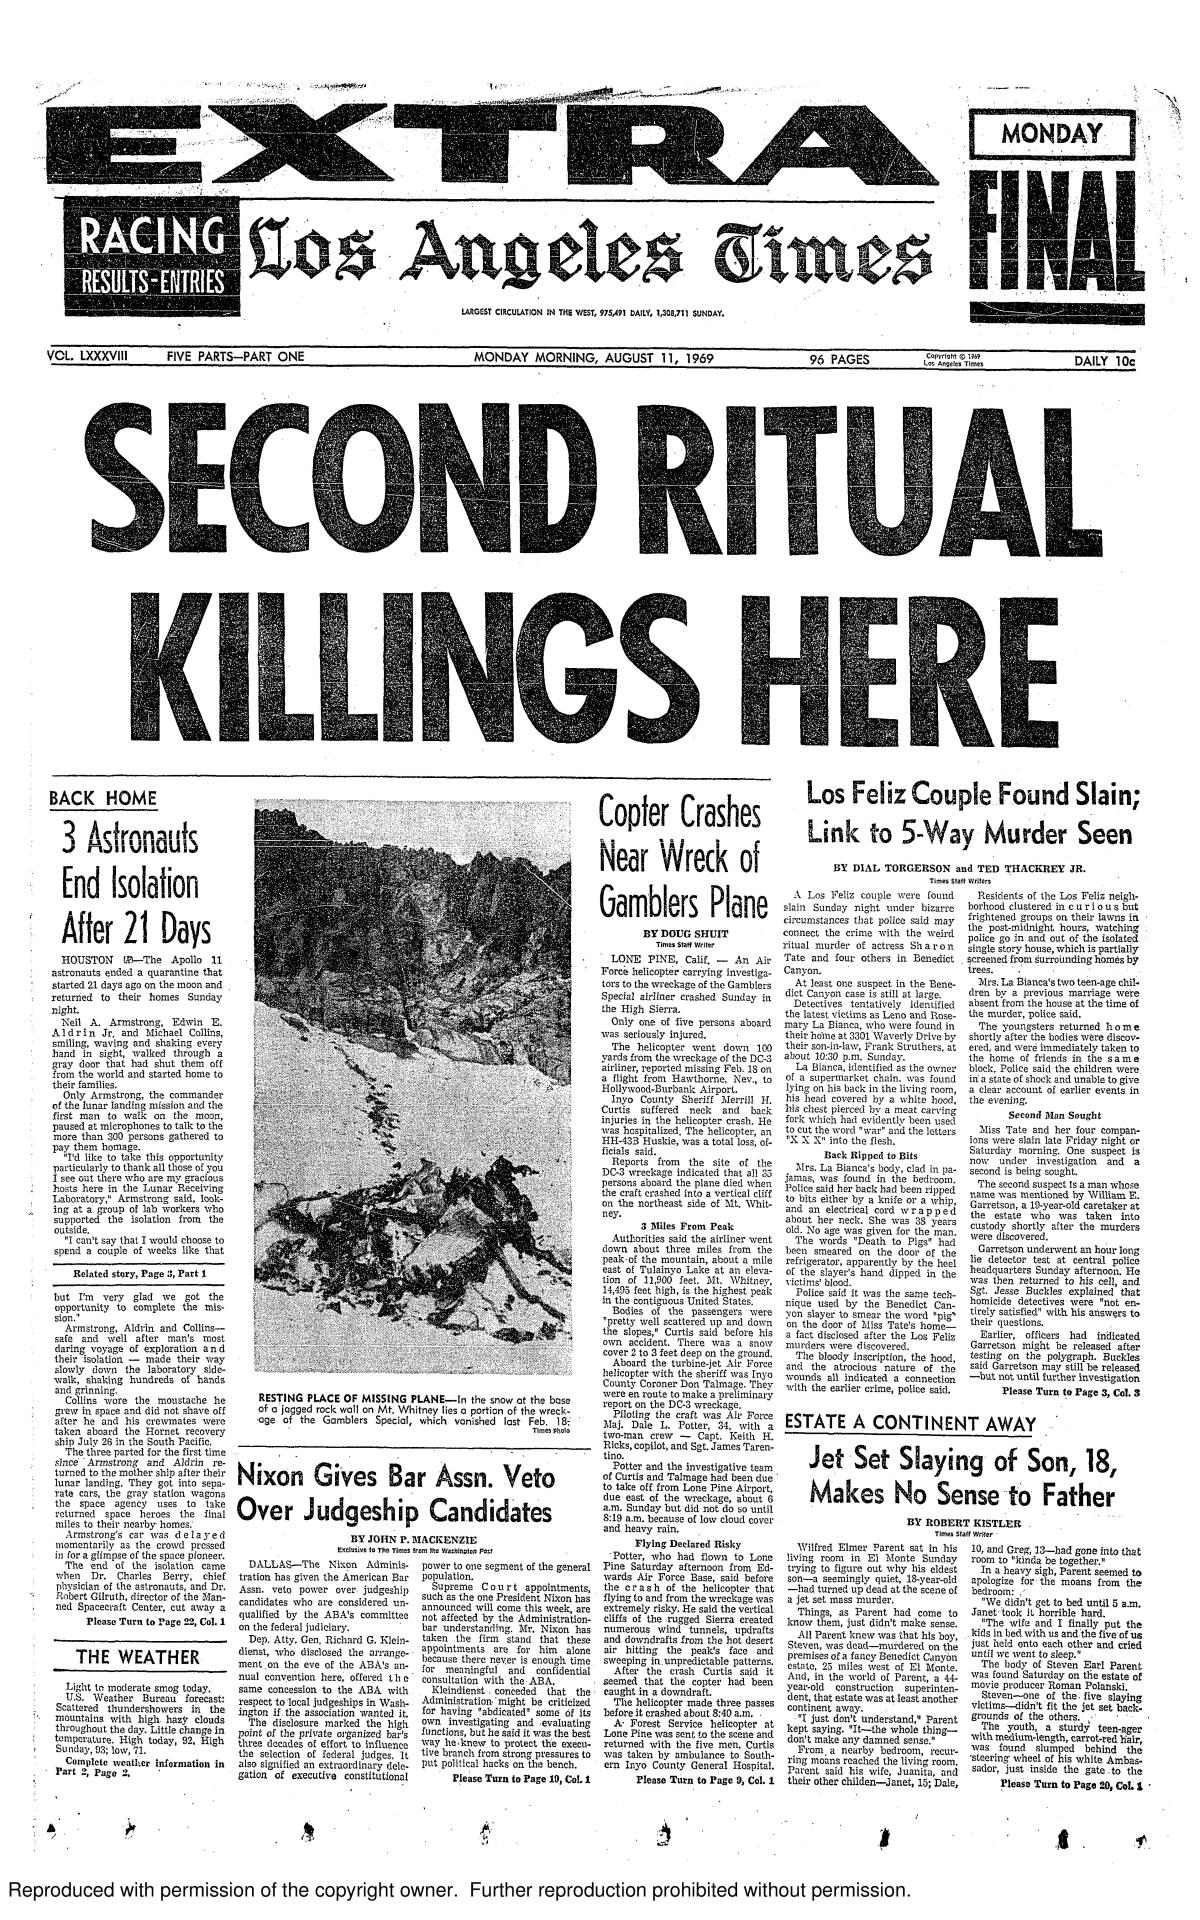 The front page of the Los Angeles Times on Aug. 11, 1969